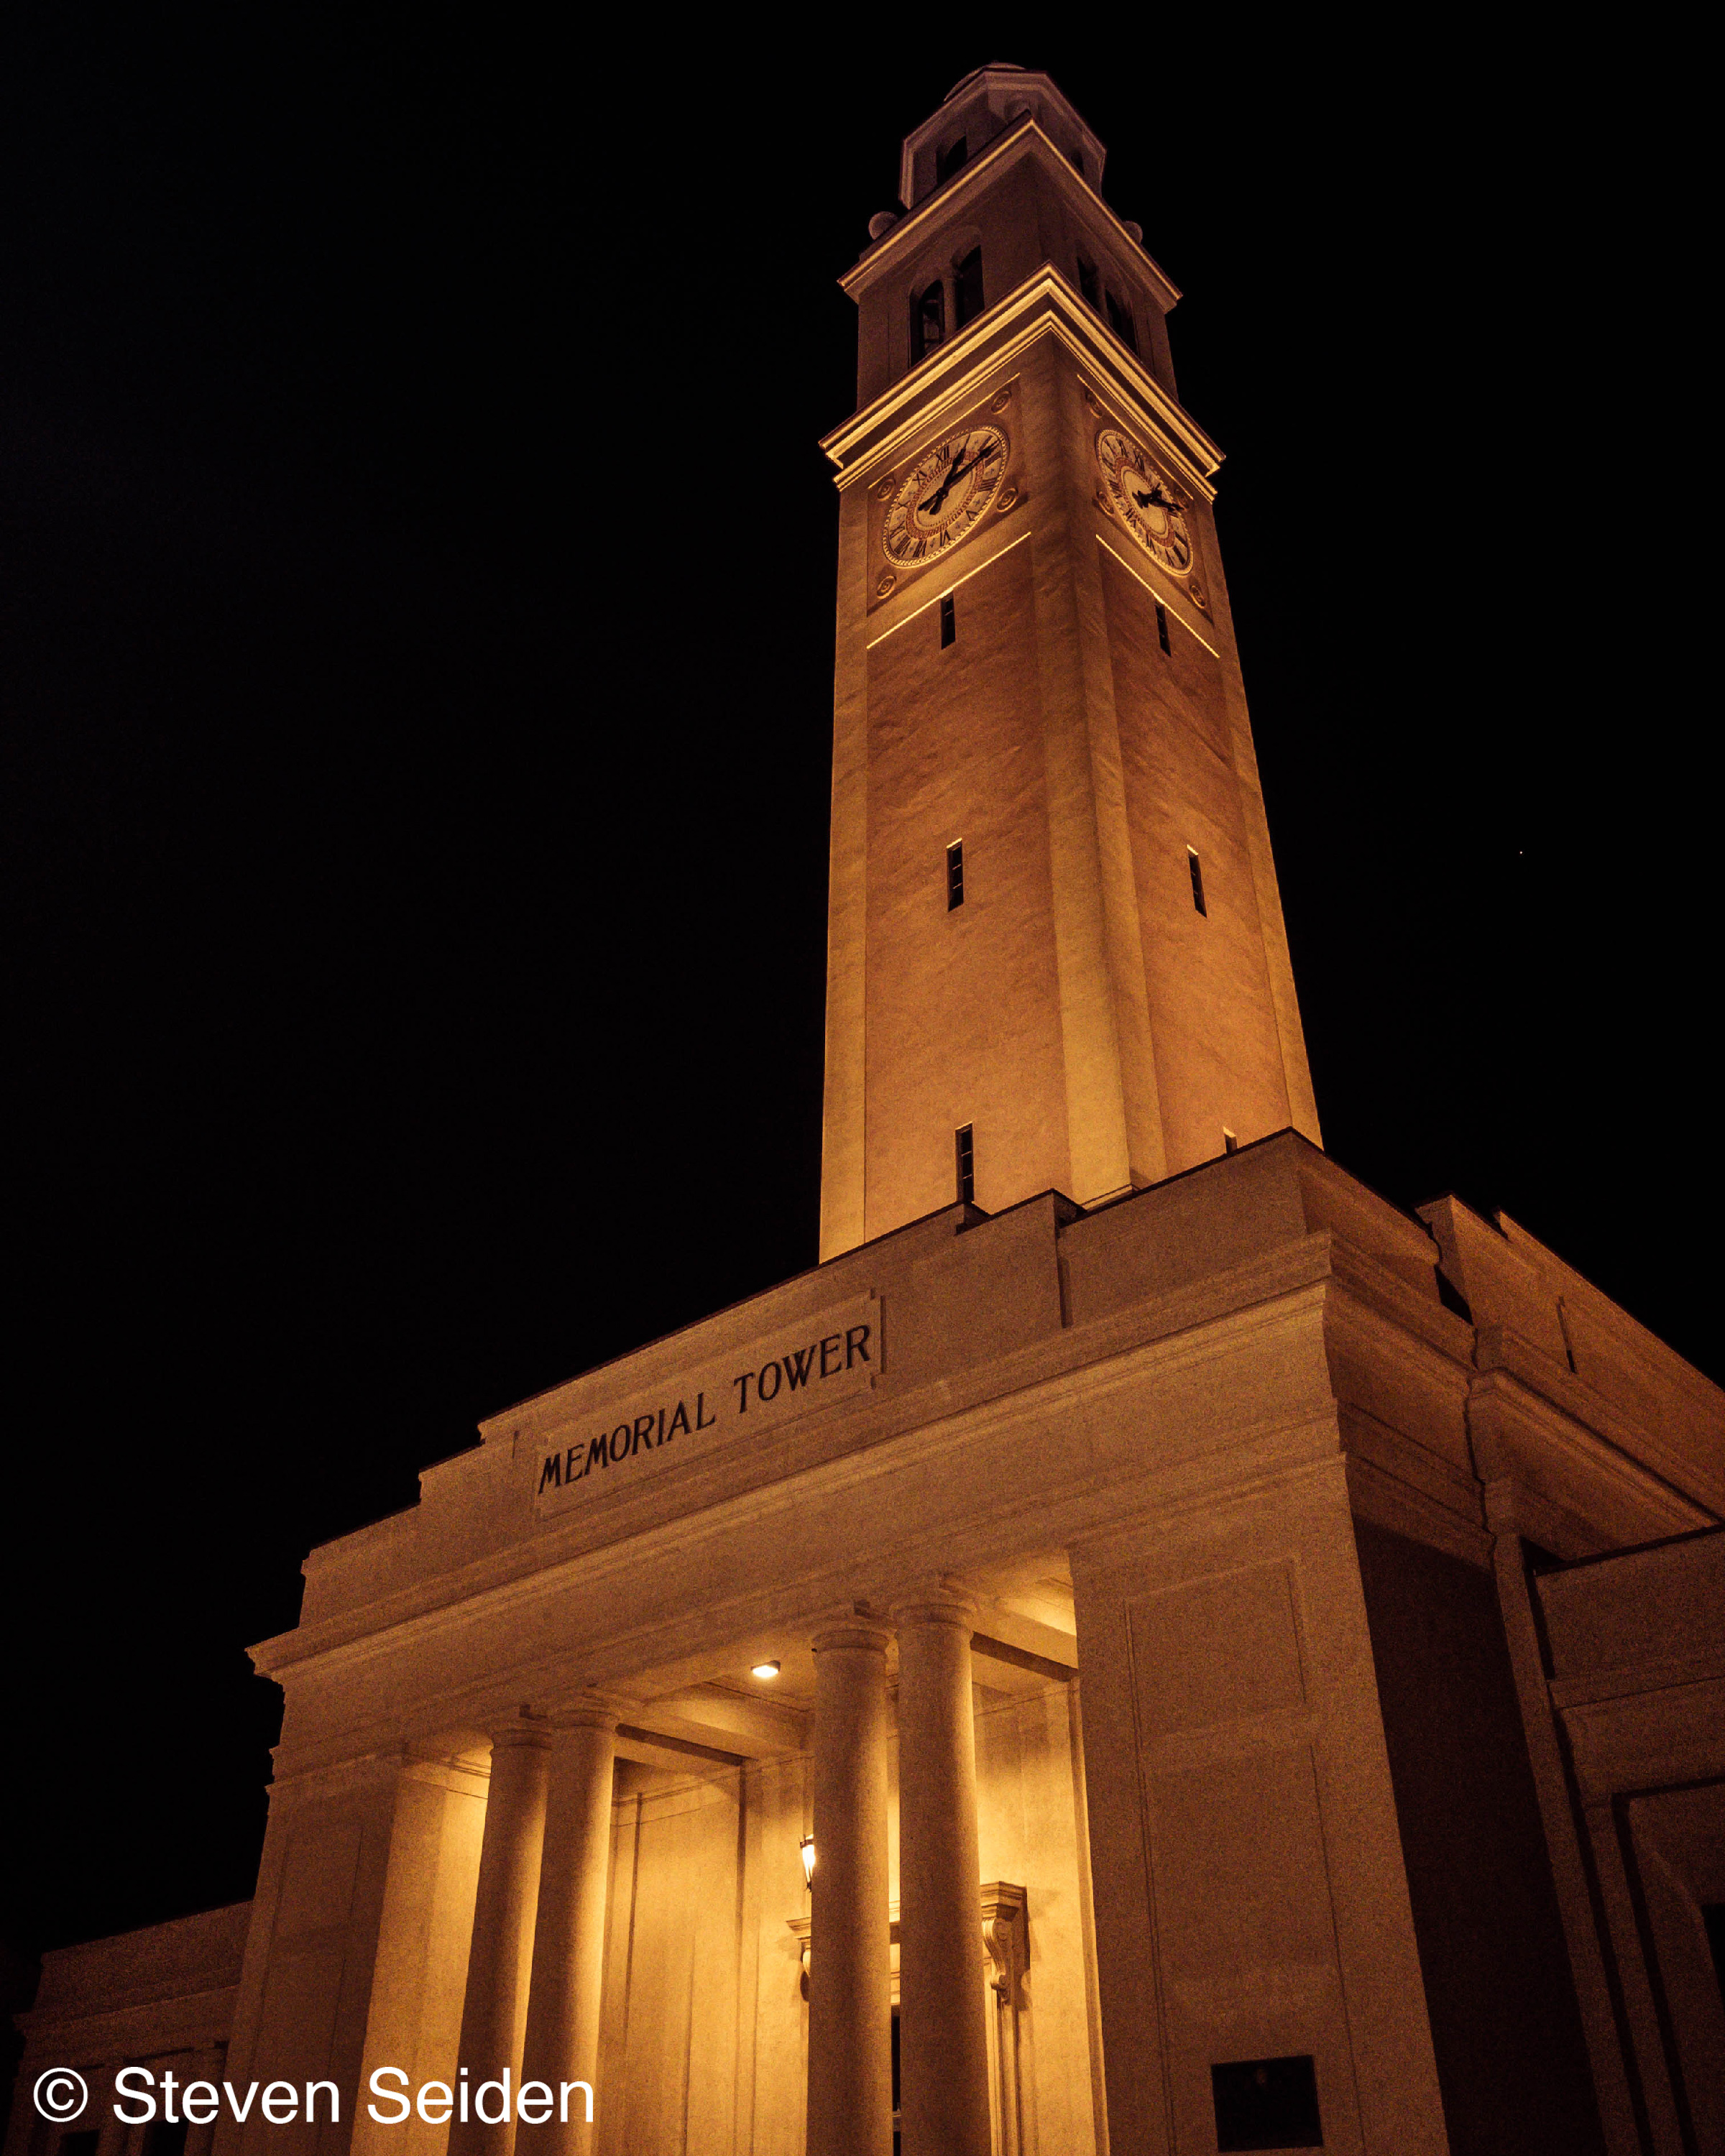 A picture of a clock tower at night.